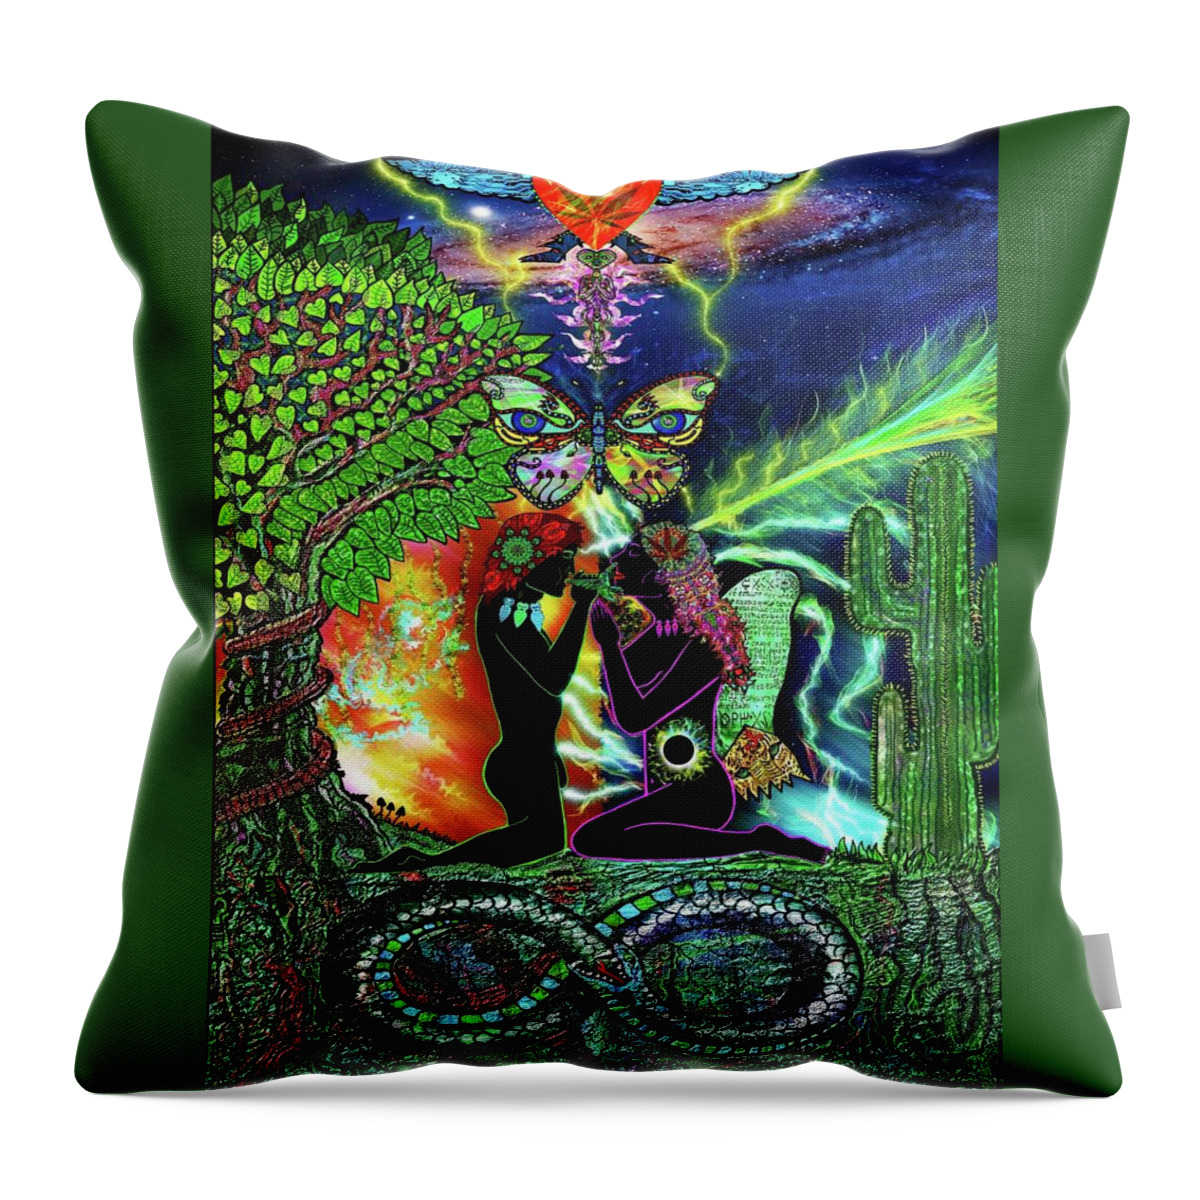 Visionary Art Throw Pillow featuring the mixed media Interdimensional Amor by Myztico Campo